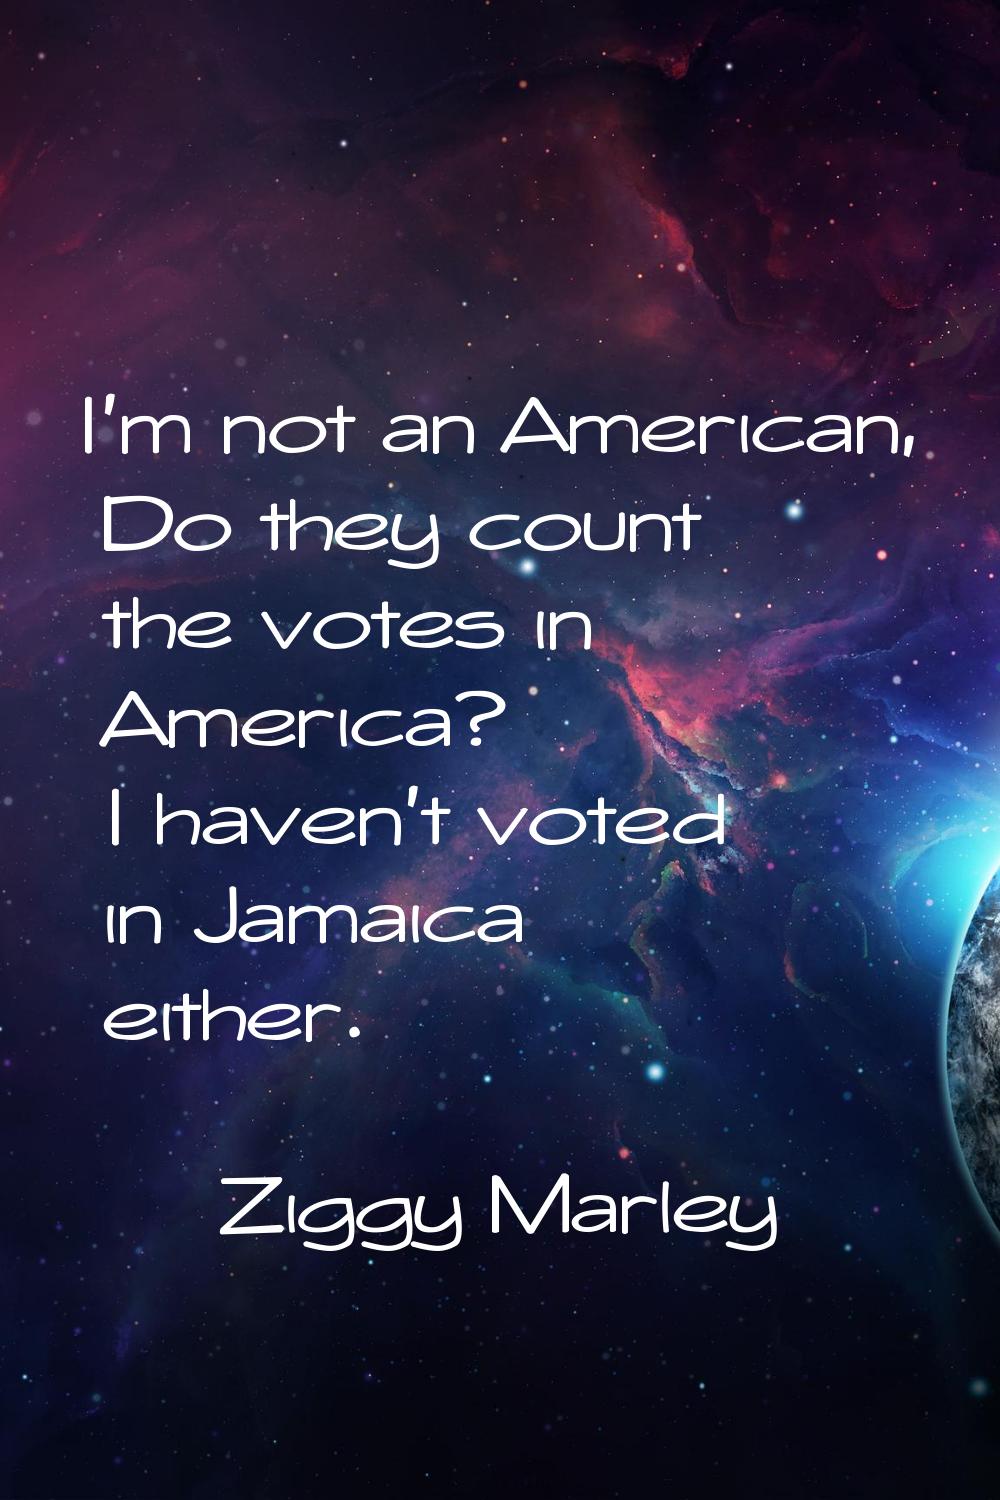 I'm not an American, Do they count the votes in America? I haven't voted in Jamaica either.